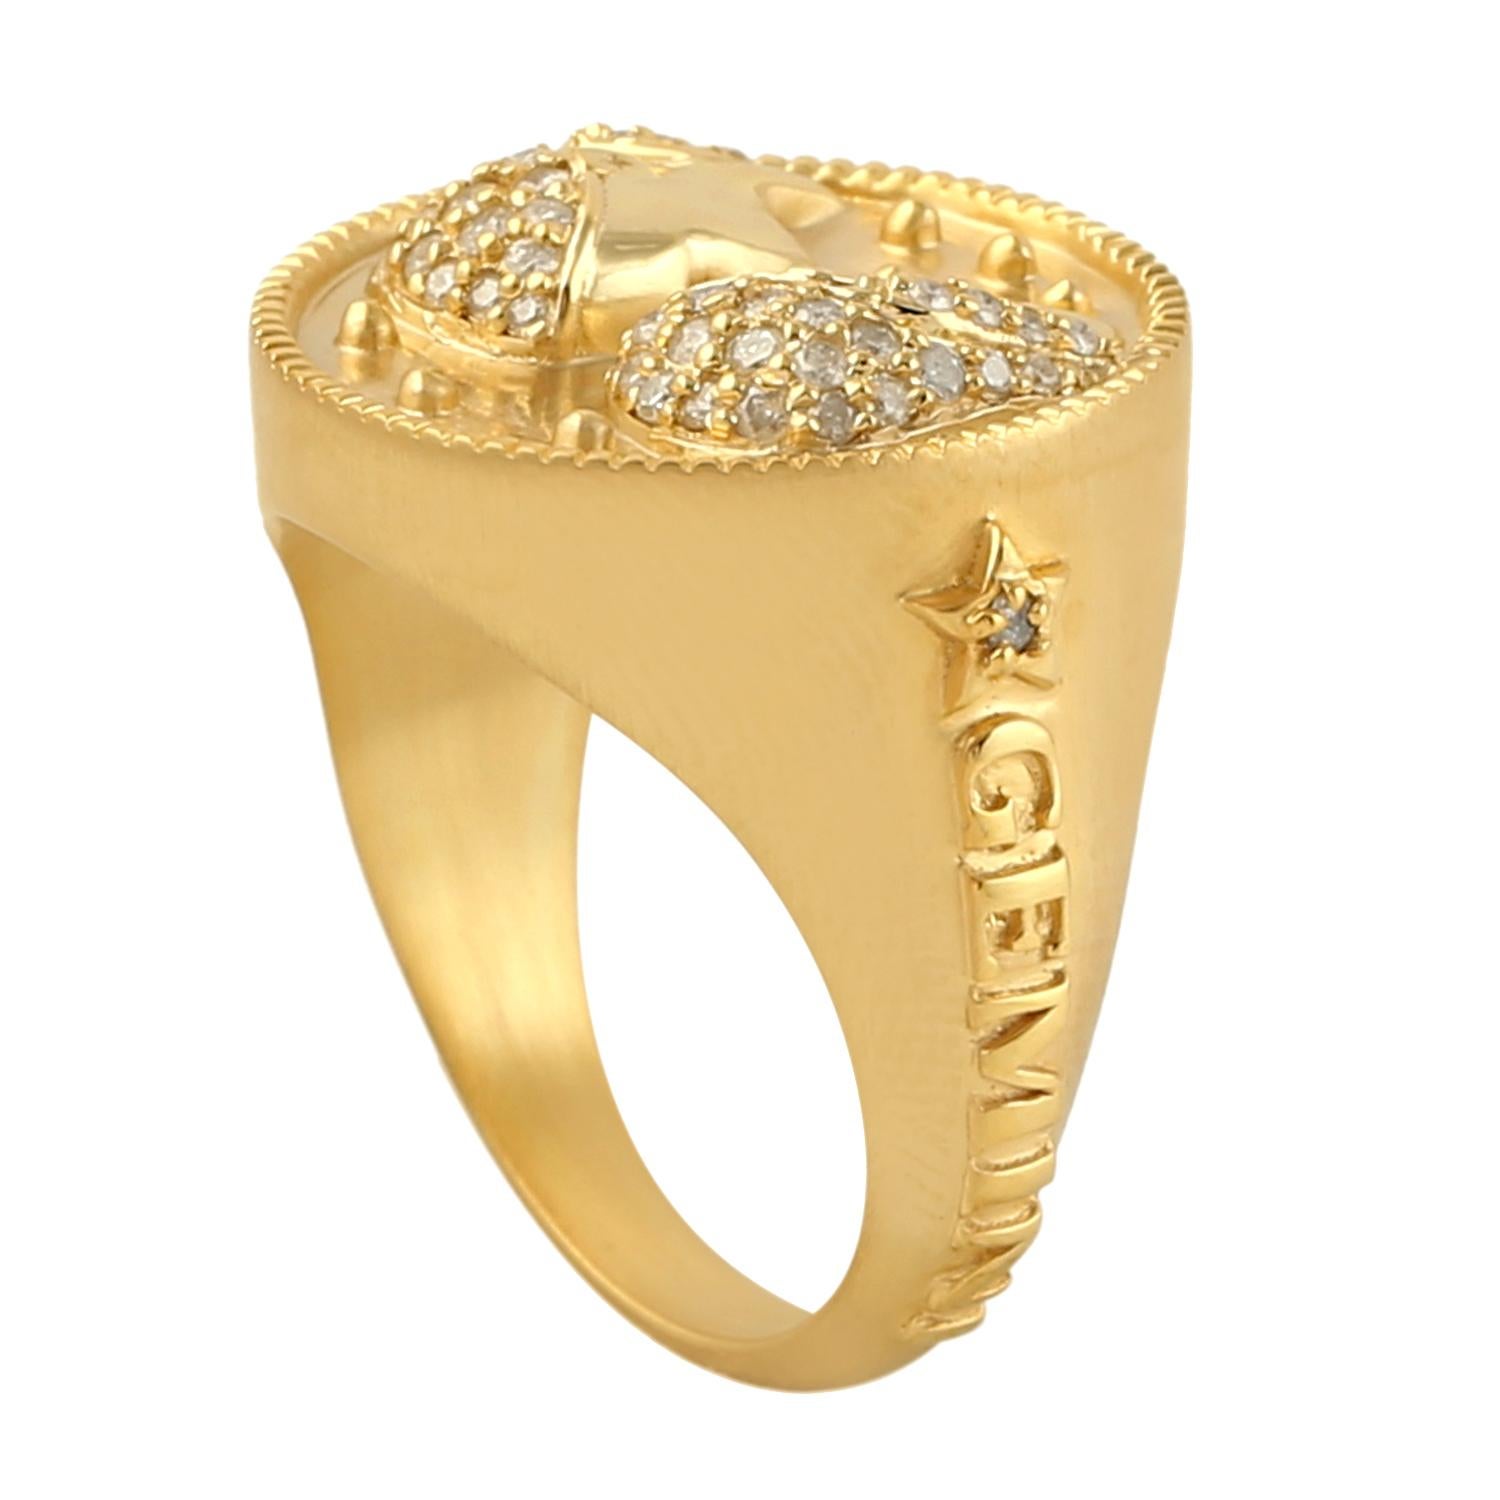 Women's 14k Gold Designer Ring With Pave-Set Of Diamonds For Sale